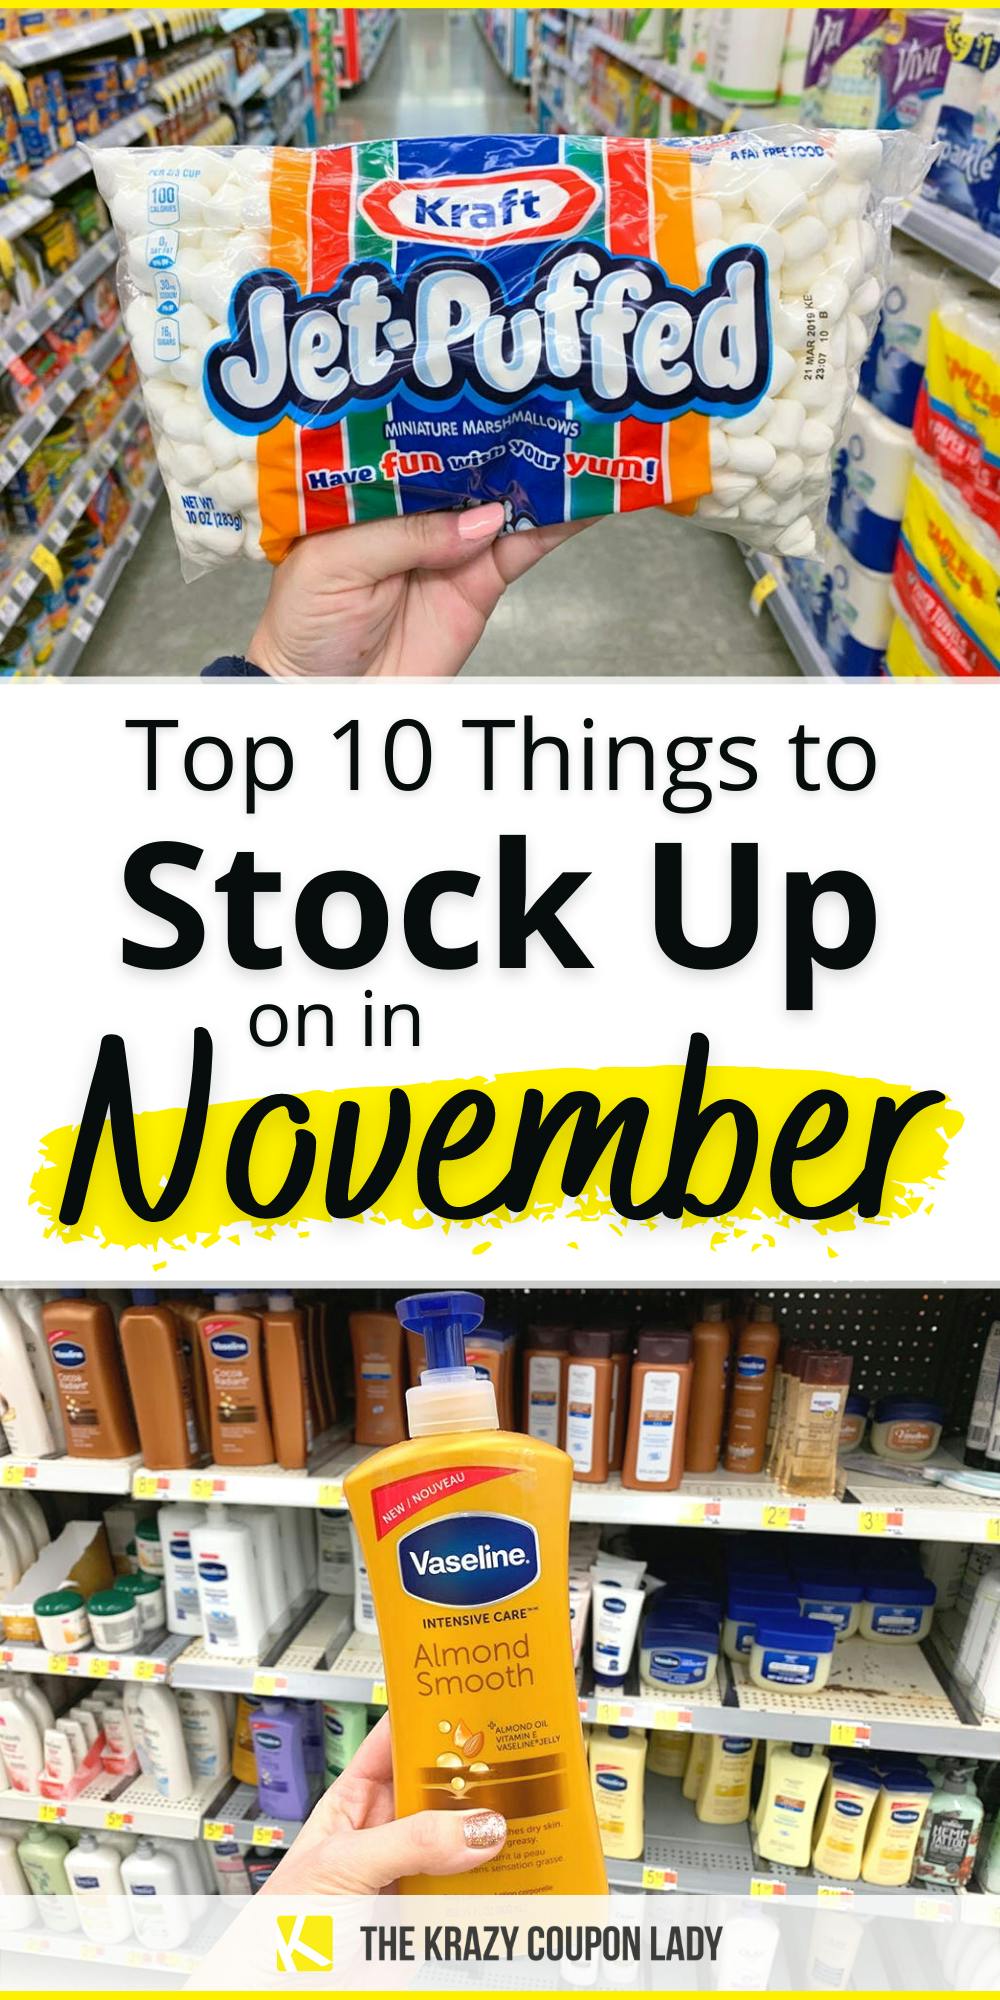 10 Items You Need to Stock Up On in November to Save